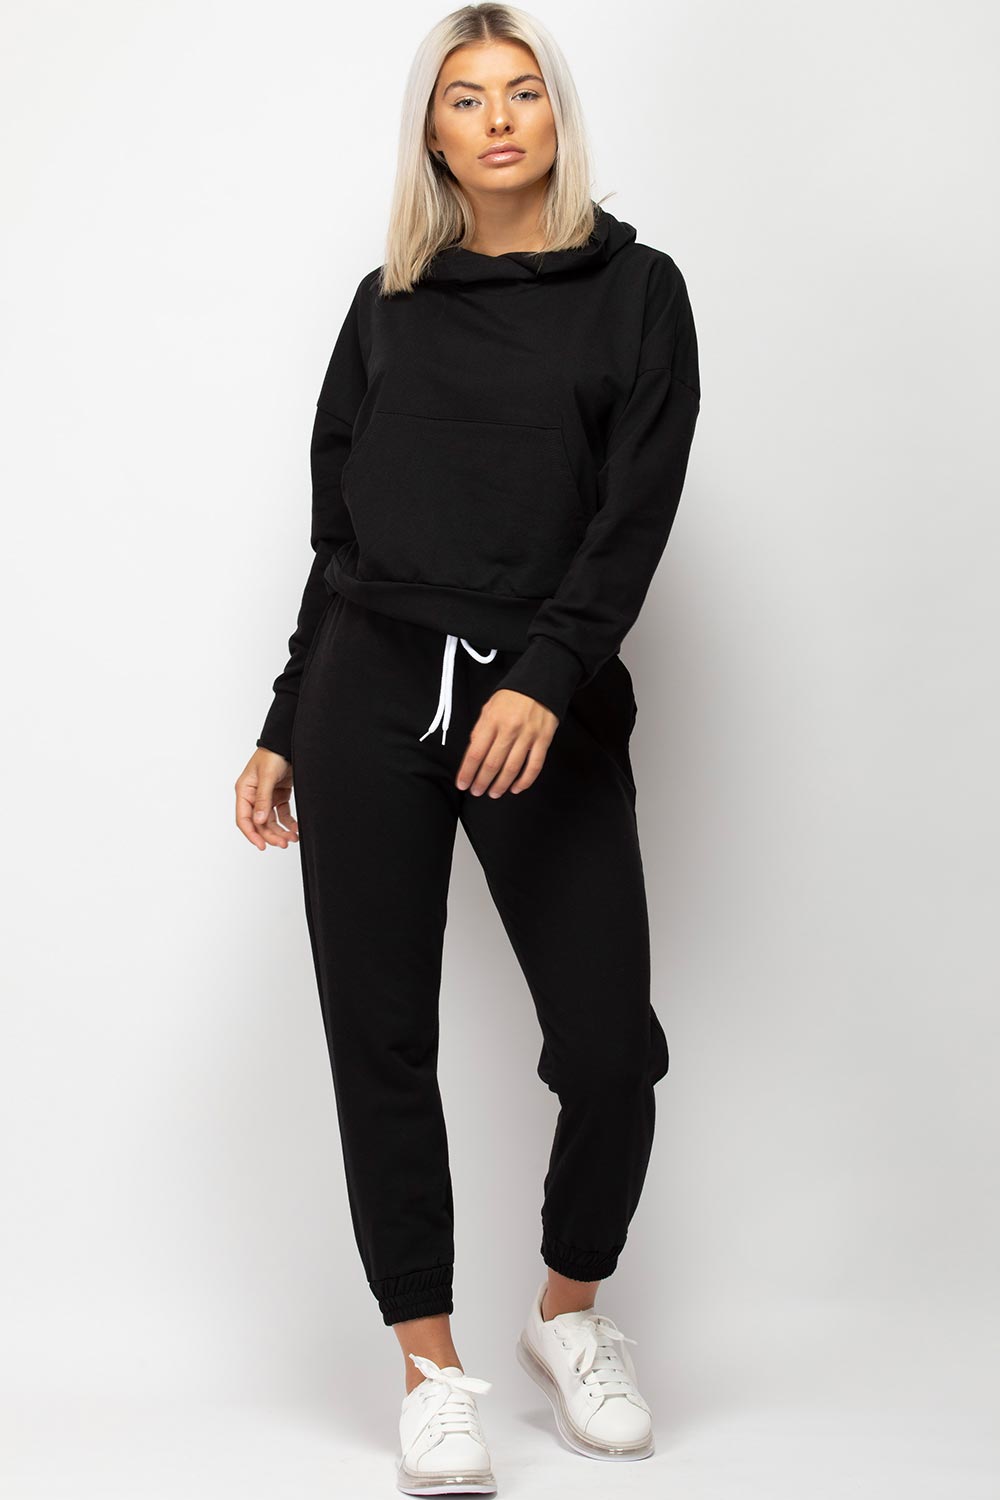 Womens Black Hooded Loungewear Set Hoodie And joggers Tracksuit Co-Ord